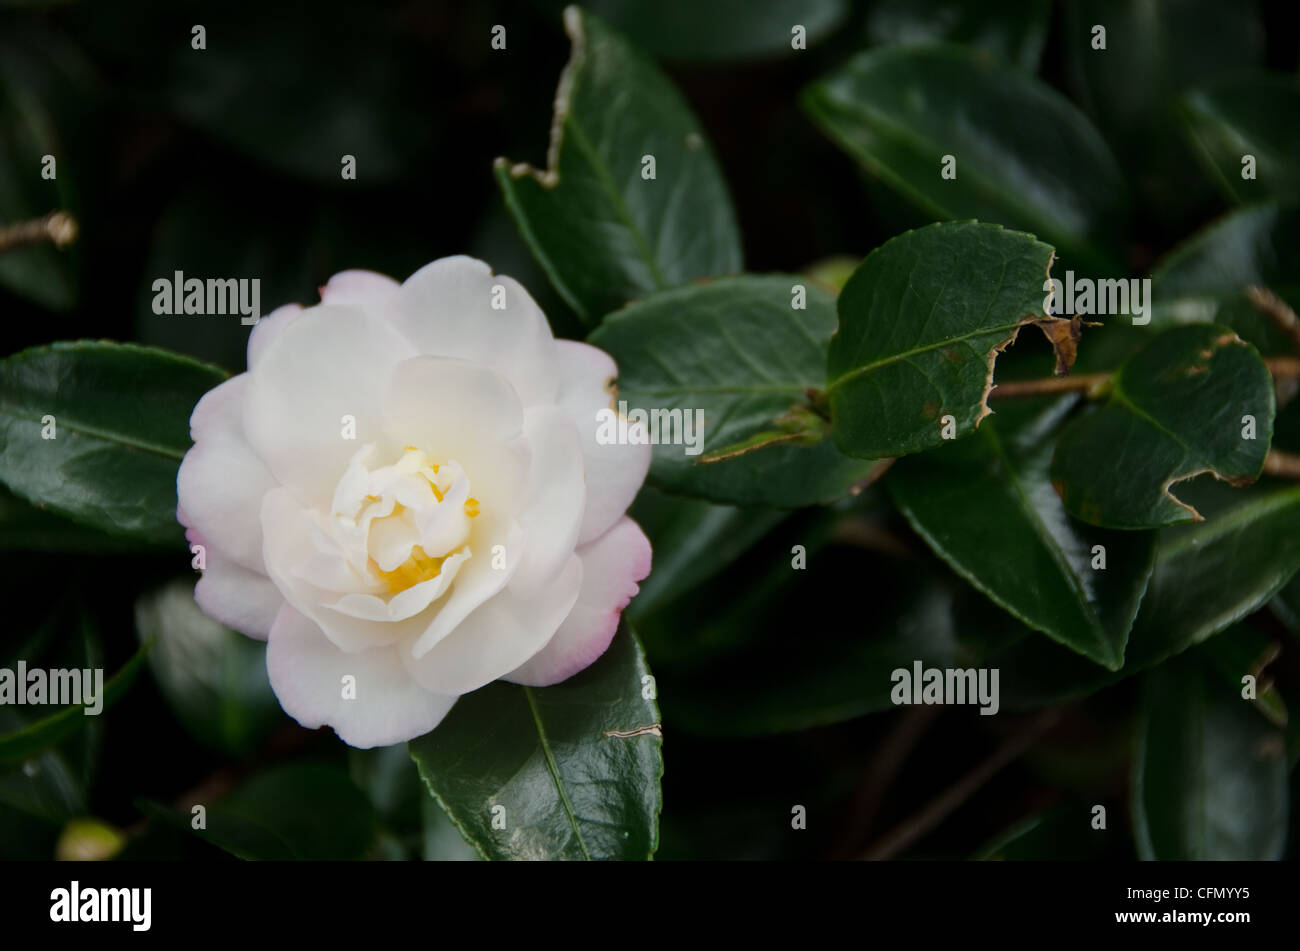 White flower of Japanese Camellia, Camellia japonica, on the plant Stock Photo